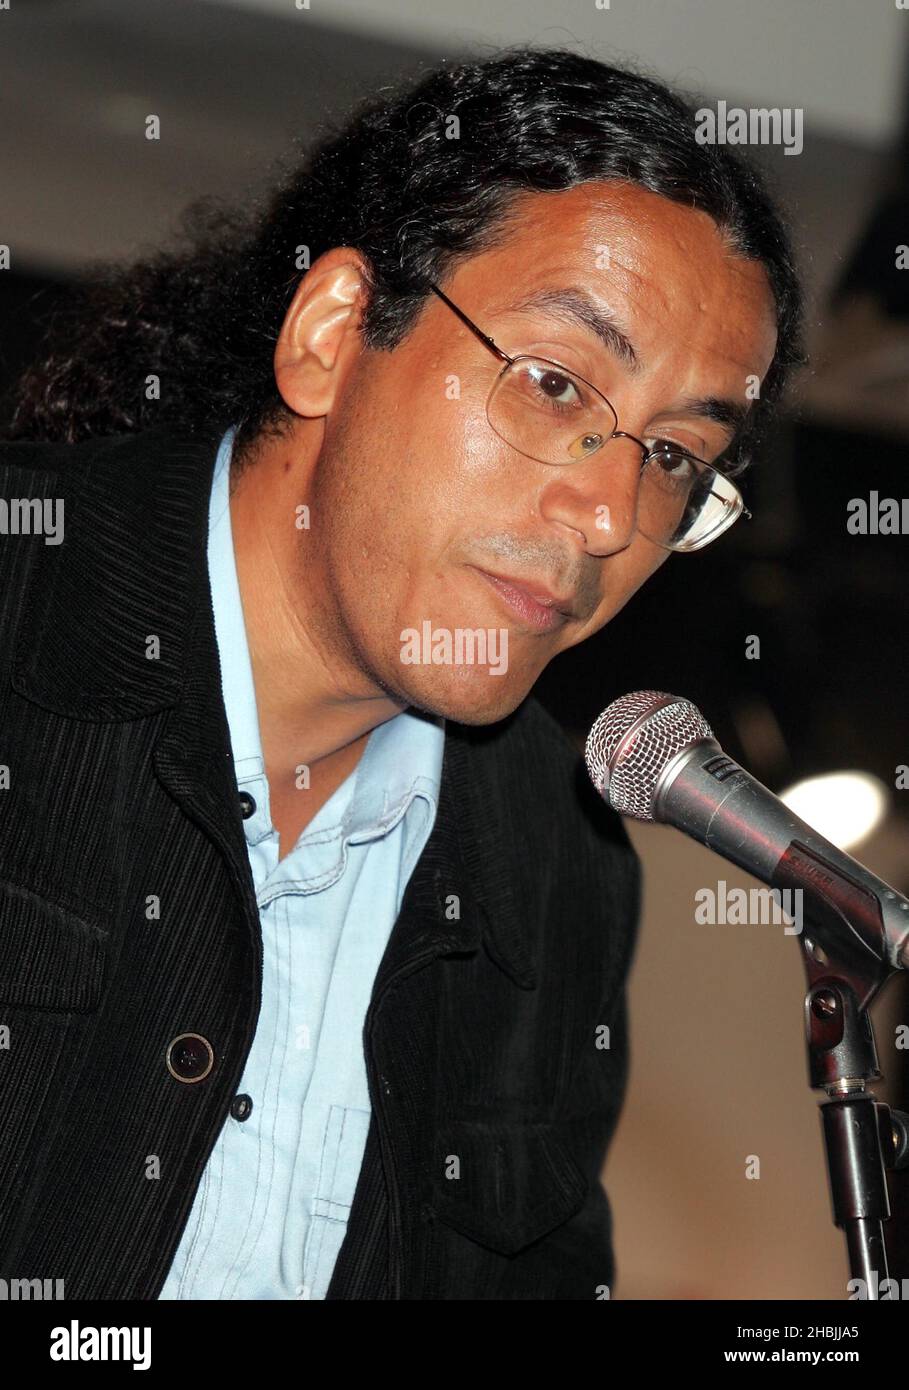 Phil Alexander managing editor of Mojo Magazine hosts at 'The MOJO Honours List Launch Party', the launch event for MOJO's second annual awards, at HMV Oxford Street on May 4, 2005 in London. Stock Photo